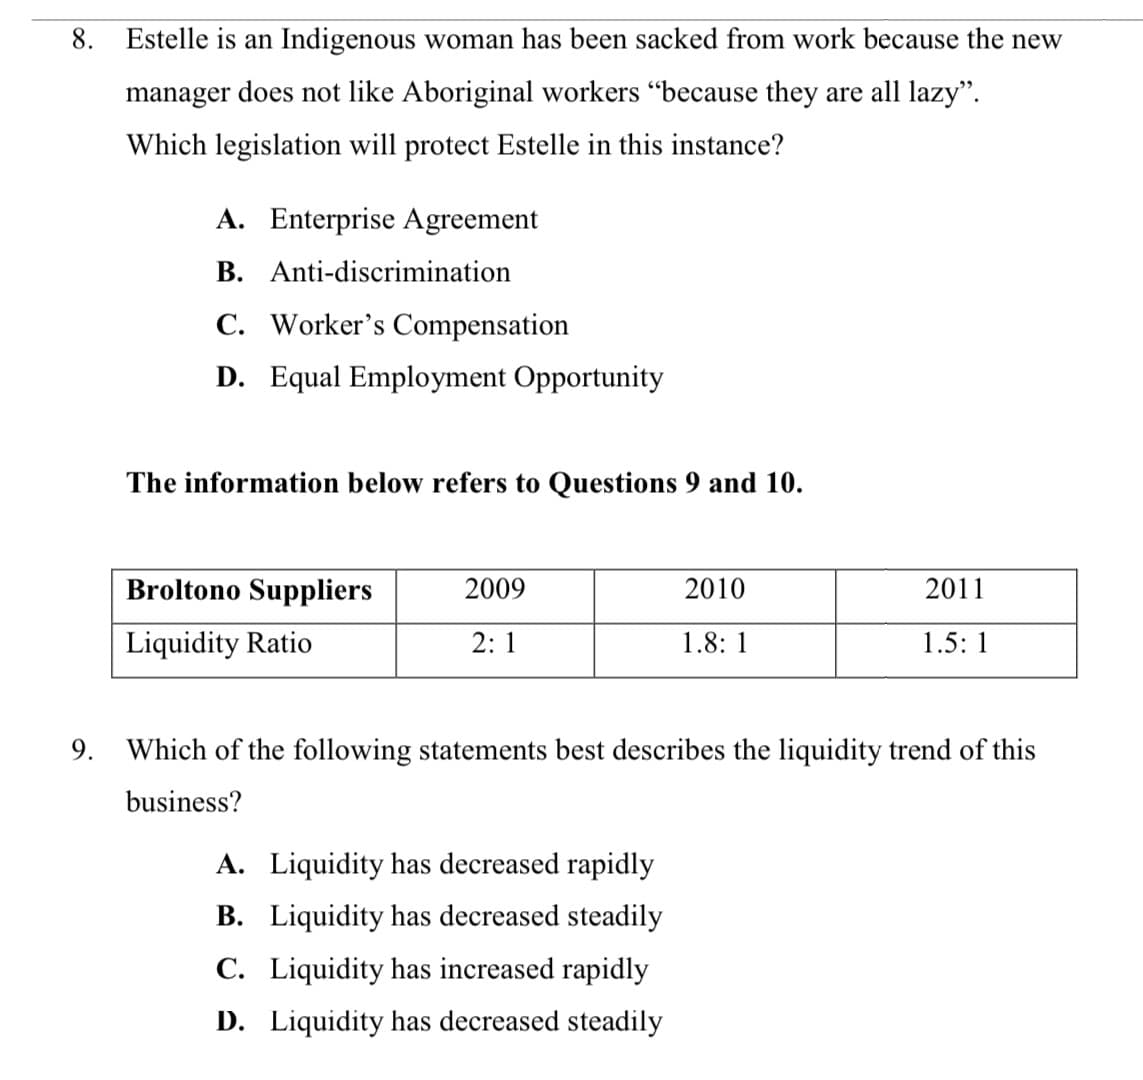 8. Estelle is an Indigenous woman has been sacked from work because the new
manager does not like Aboriginal workers “because they are all lazy".
Which legislation will protect Estelle in this instance?
A. Enterprise Agreement
B. Anti-discrimination
C. Worker's Compensation
D. Equal Employment Opportunity
The information below refers to Questions 9 and 10.
Broltono Suppliers
2009
2010
2011
Liquidity Ratio
2: 1
1.8: 1
1.5: 1
9. Which of the following statements best describes the liquidity trend of this
business?
A. Liquidity has decreased rapidly
B. Liquidity has decreased steadily
C. Liquidity has increased rapidly
D. Liquidity has decreased steadily
